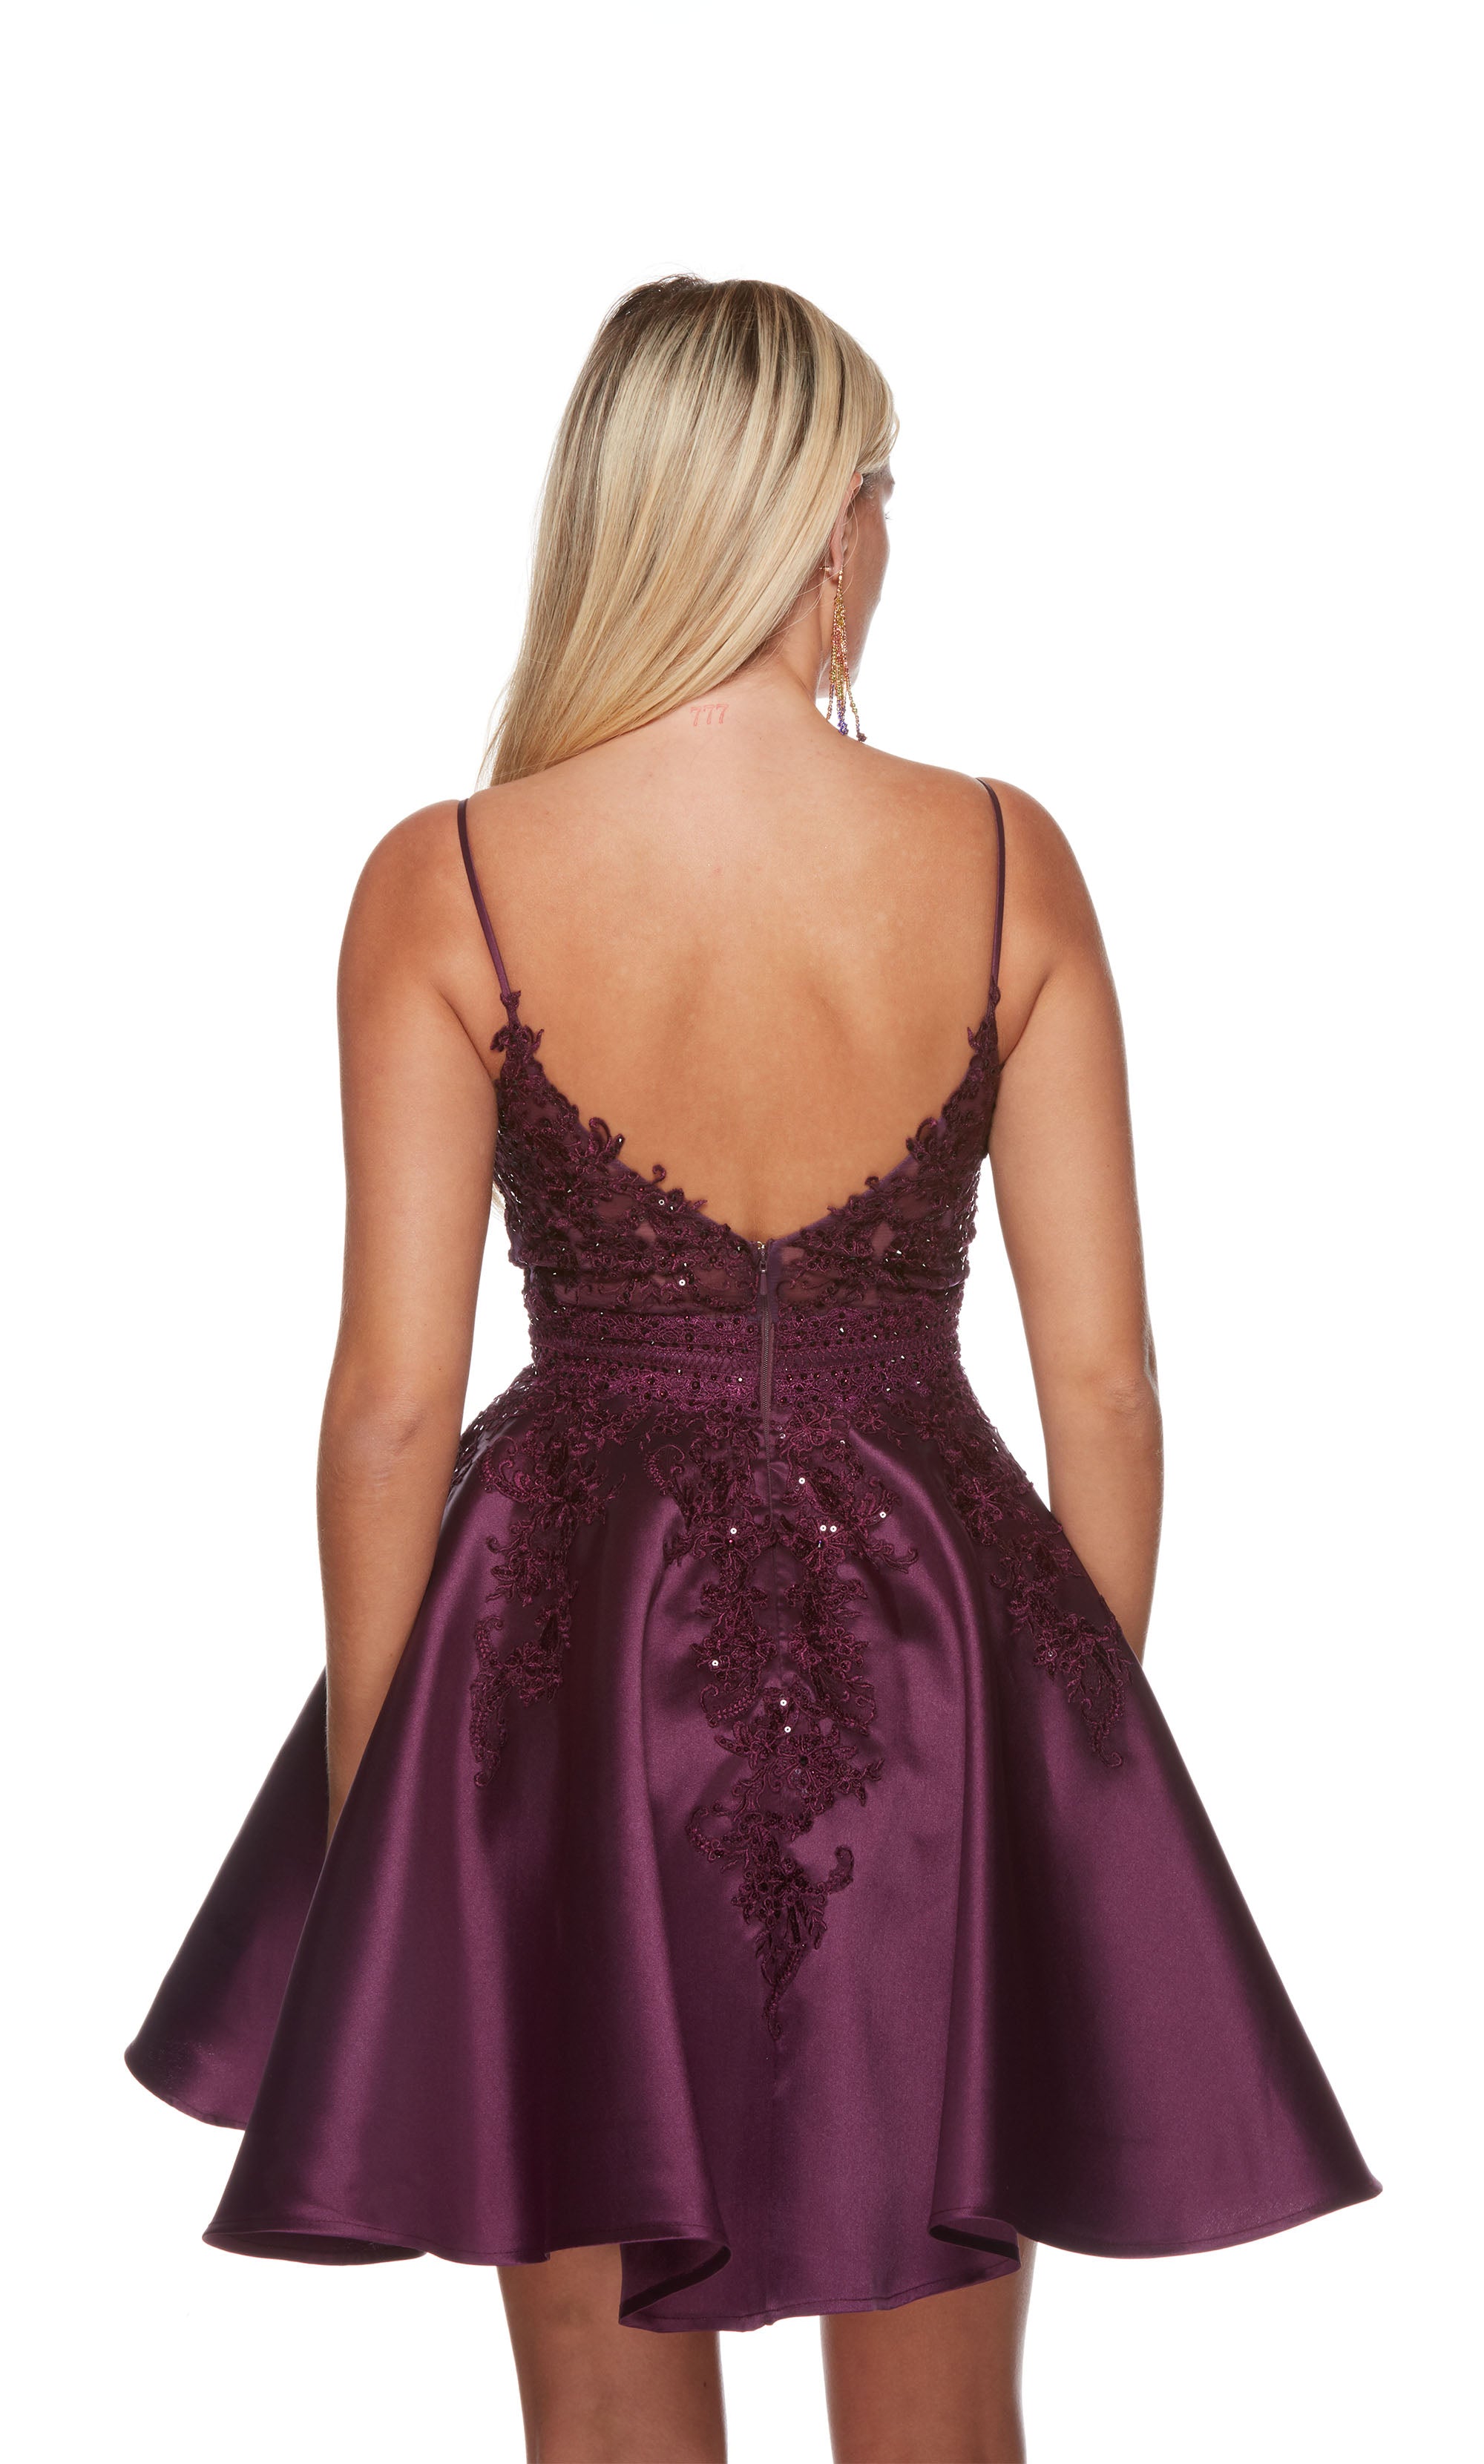 A fun and flouncy A-line dress with a slightly scooped neckline, adorned with intricate lace appliques and sequins for a touch of sparkle. The color is a rich black plum.